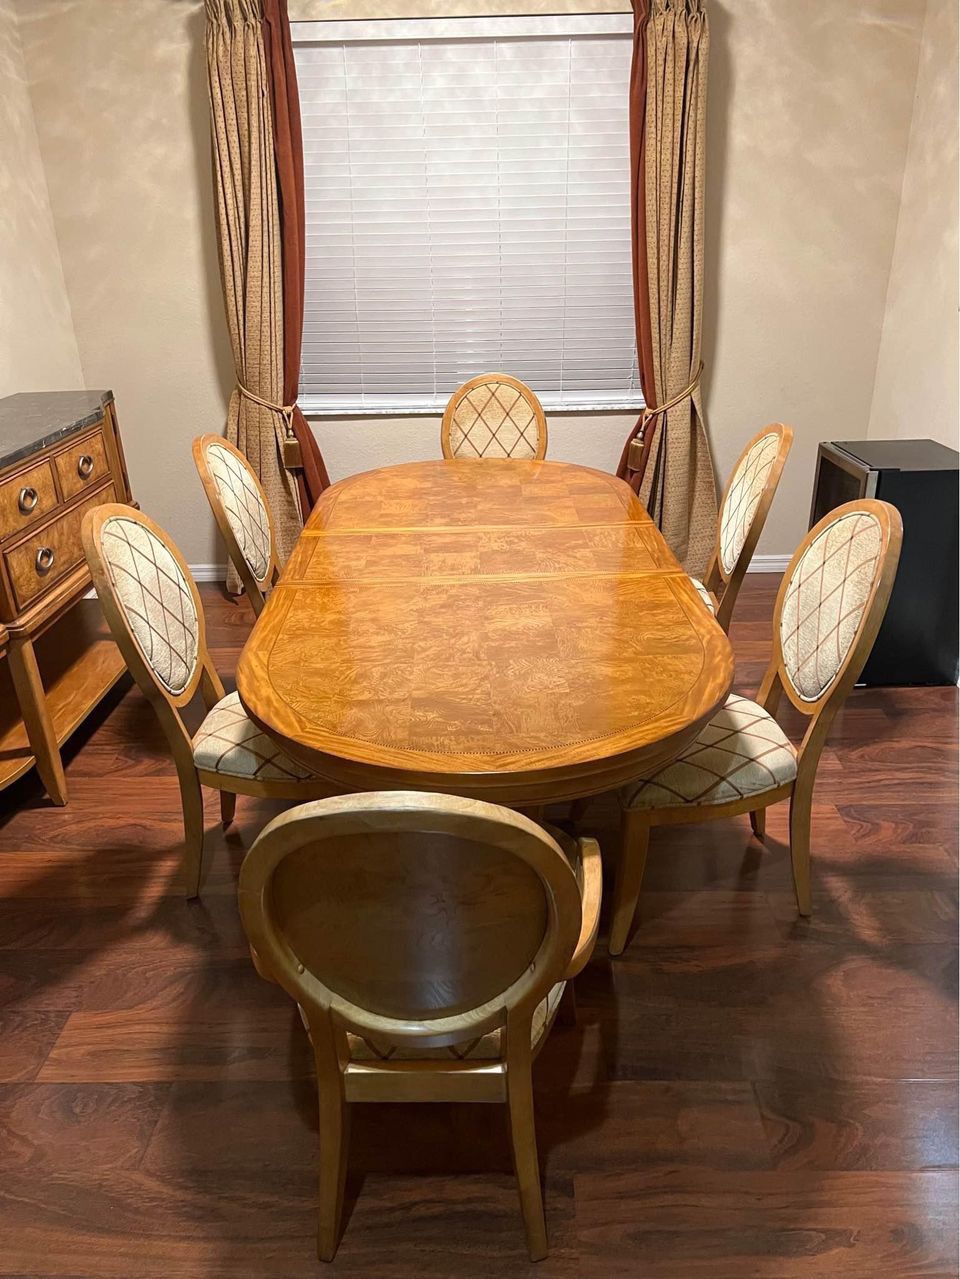 GREAT QUALITY SOLID WOOD DINING SET INCLUDING TABLE, 6 CHAIRS,  AND BUFFET